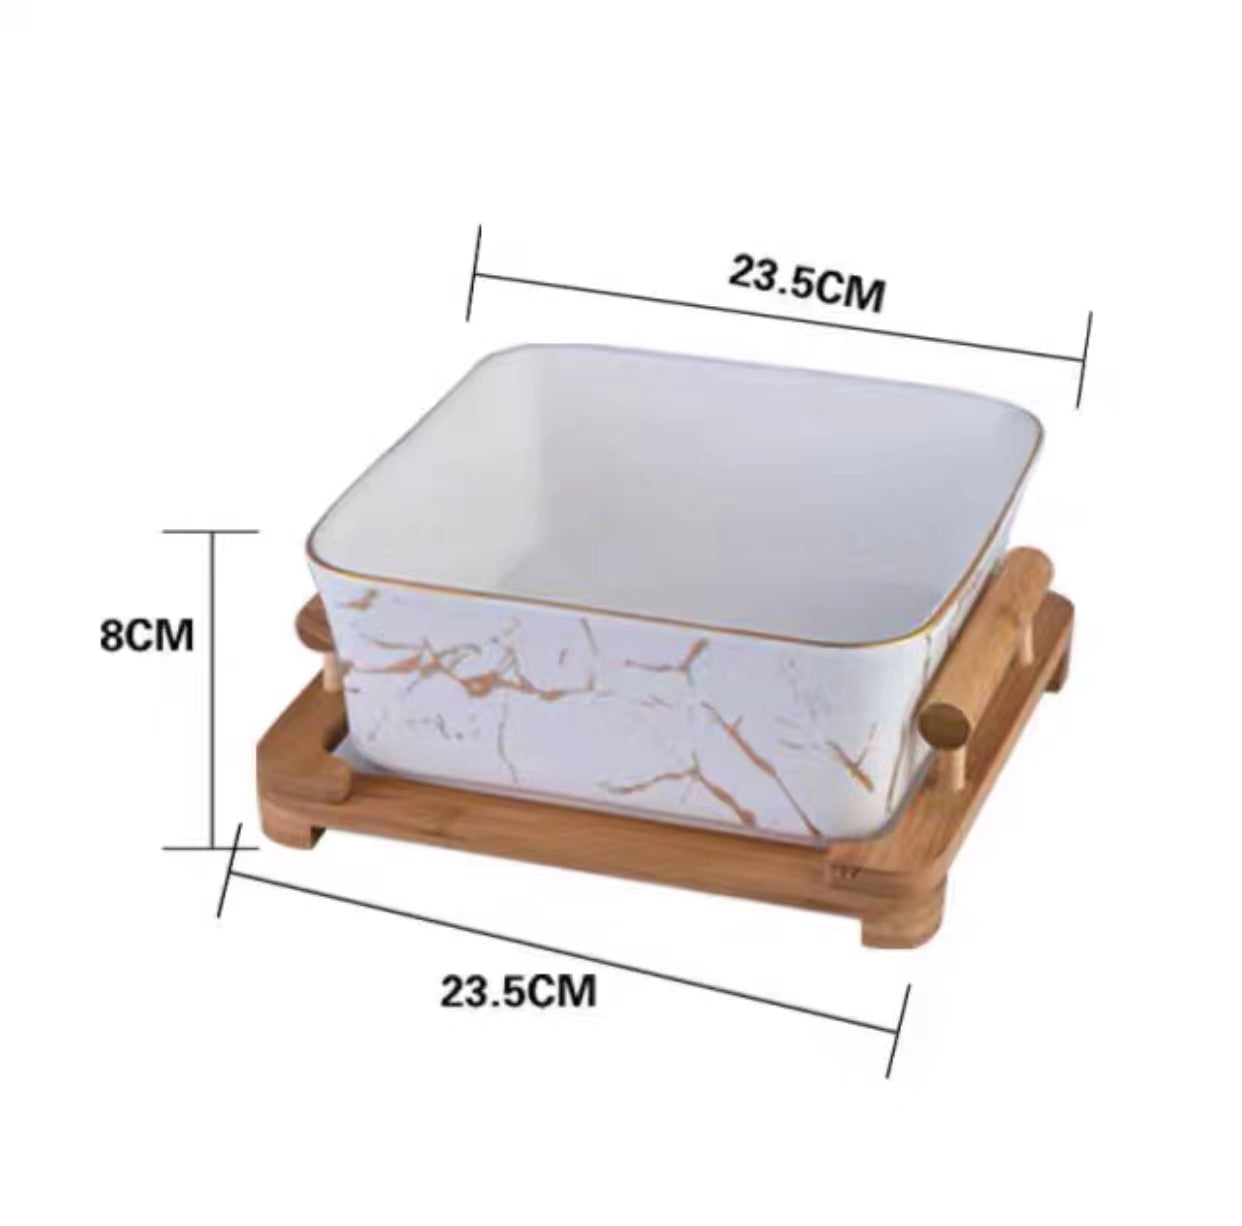 Serving Bowl With Wooden Base - 4 Seasons Home Gadgets